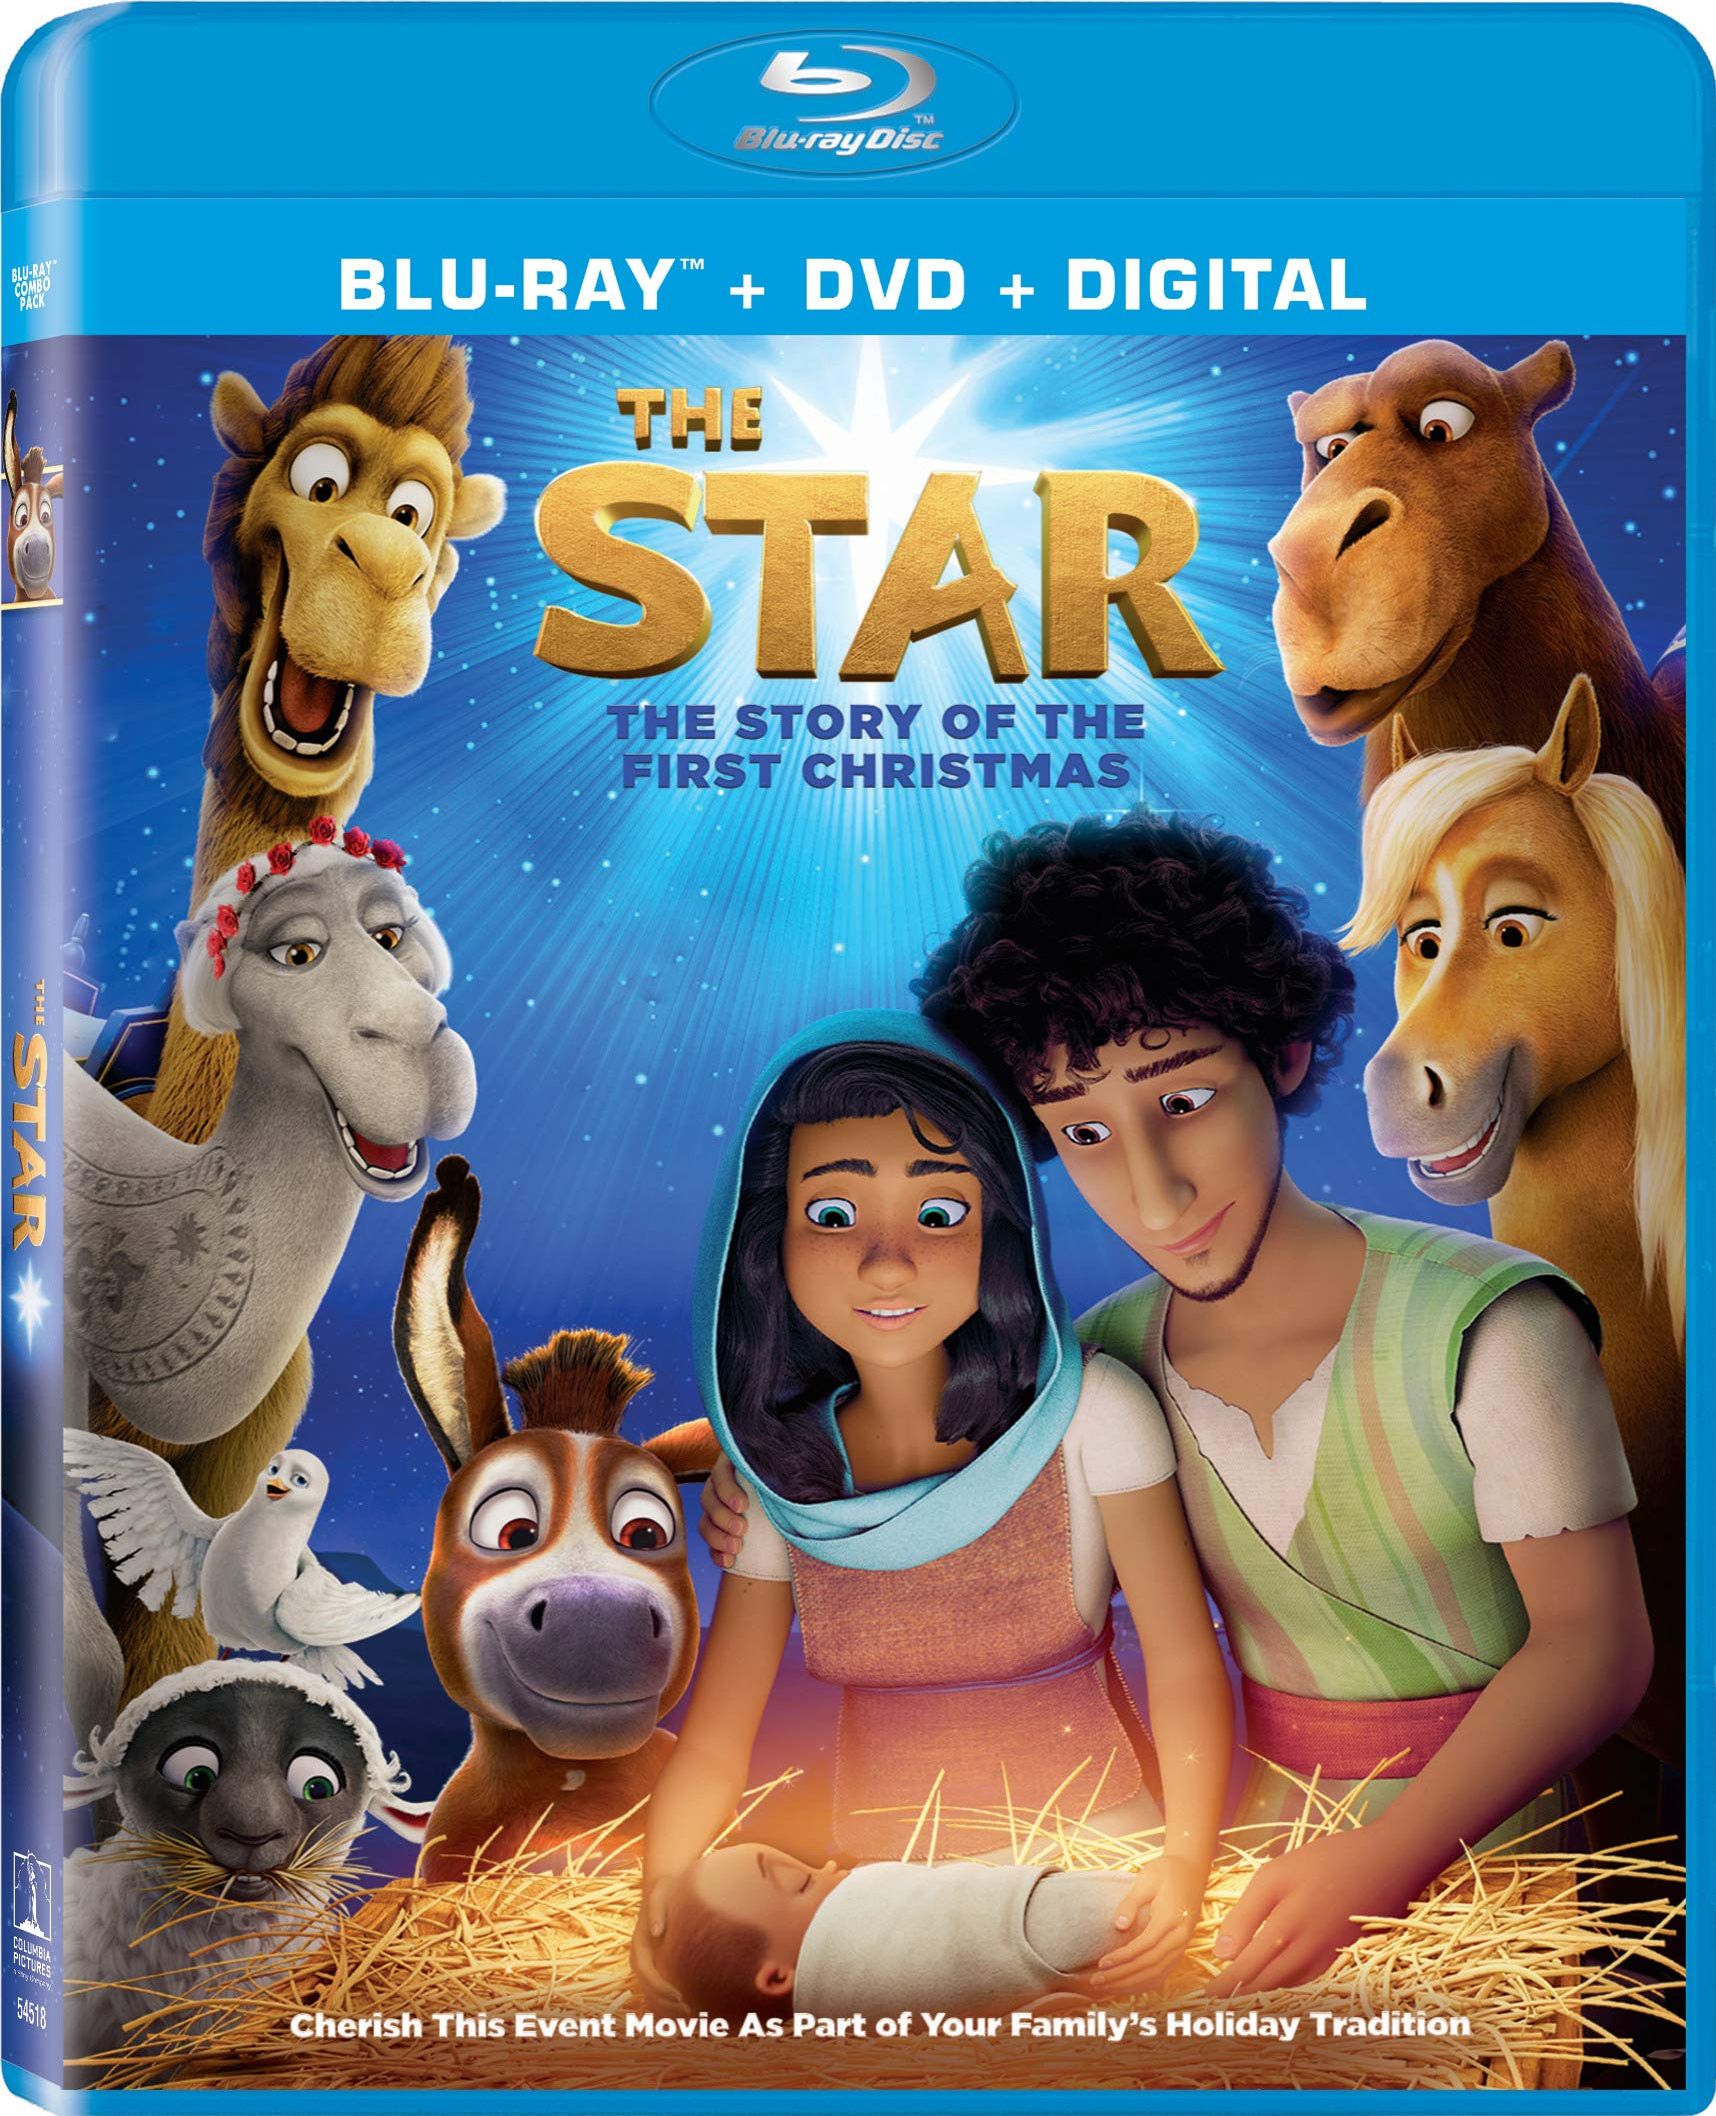 The Star DVD Release Date February 20, 2018